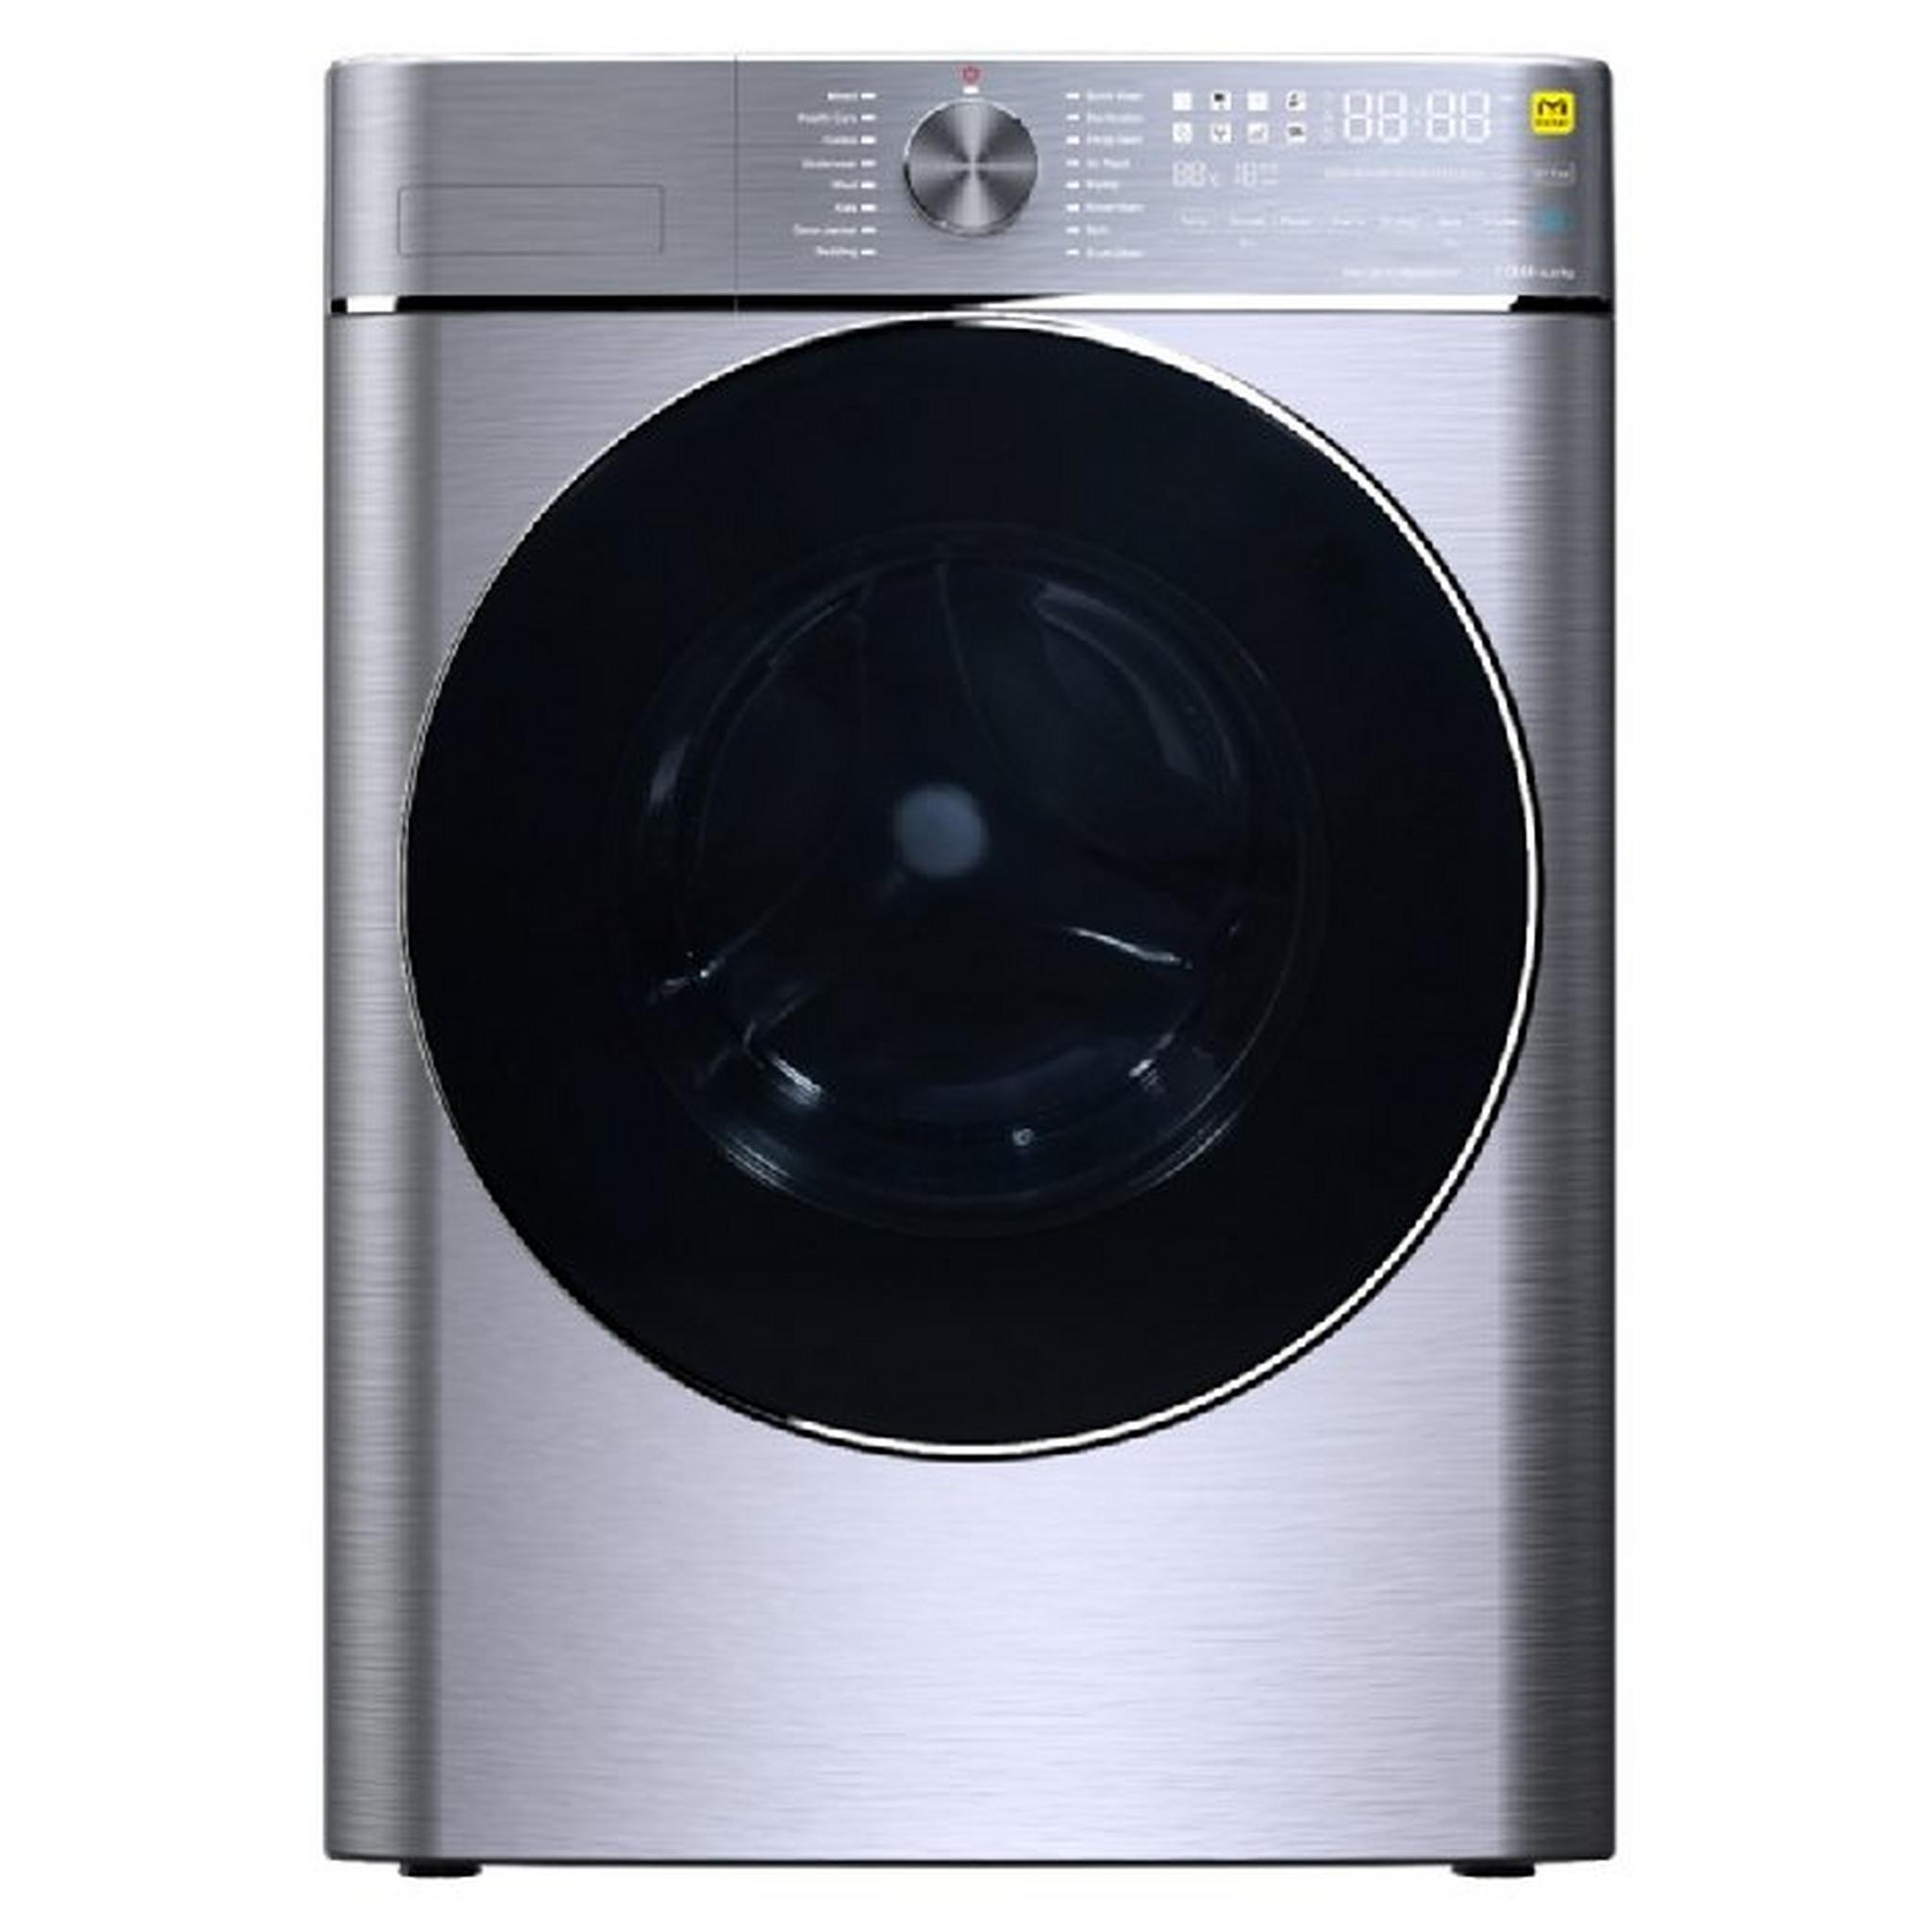 Wansa Front Load Washer\Dryer 10/6kg 1400 RPM (WGFWD10060141SST-C14)